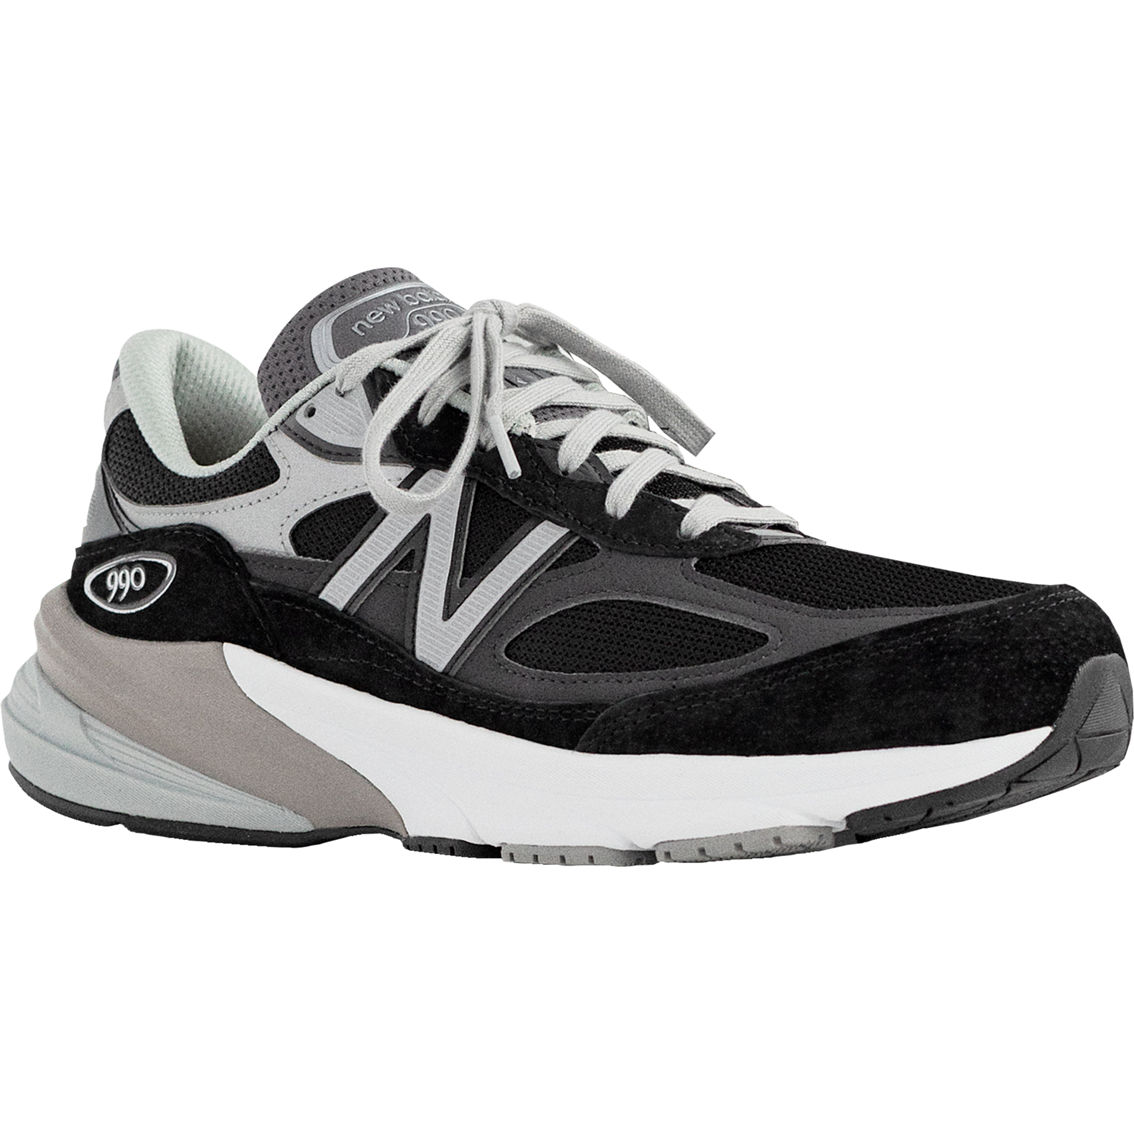 New Balance Made in USA 990v6 Running Shoes - Image 1 of 3